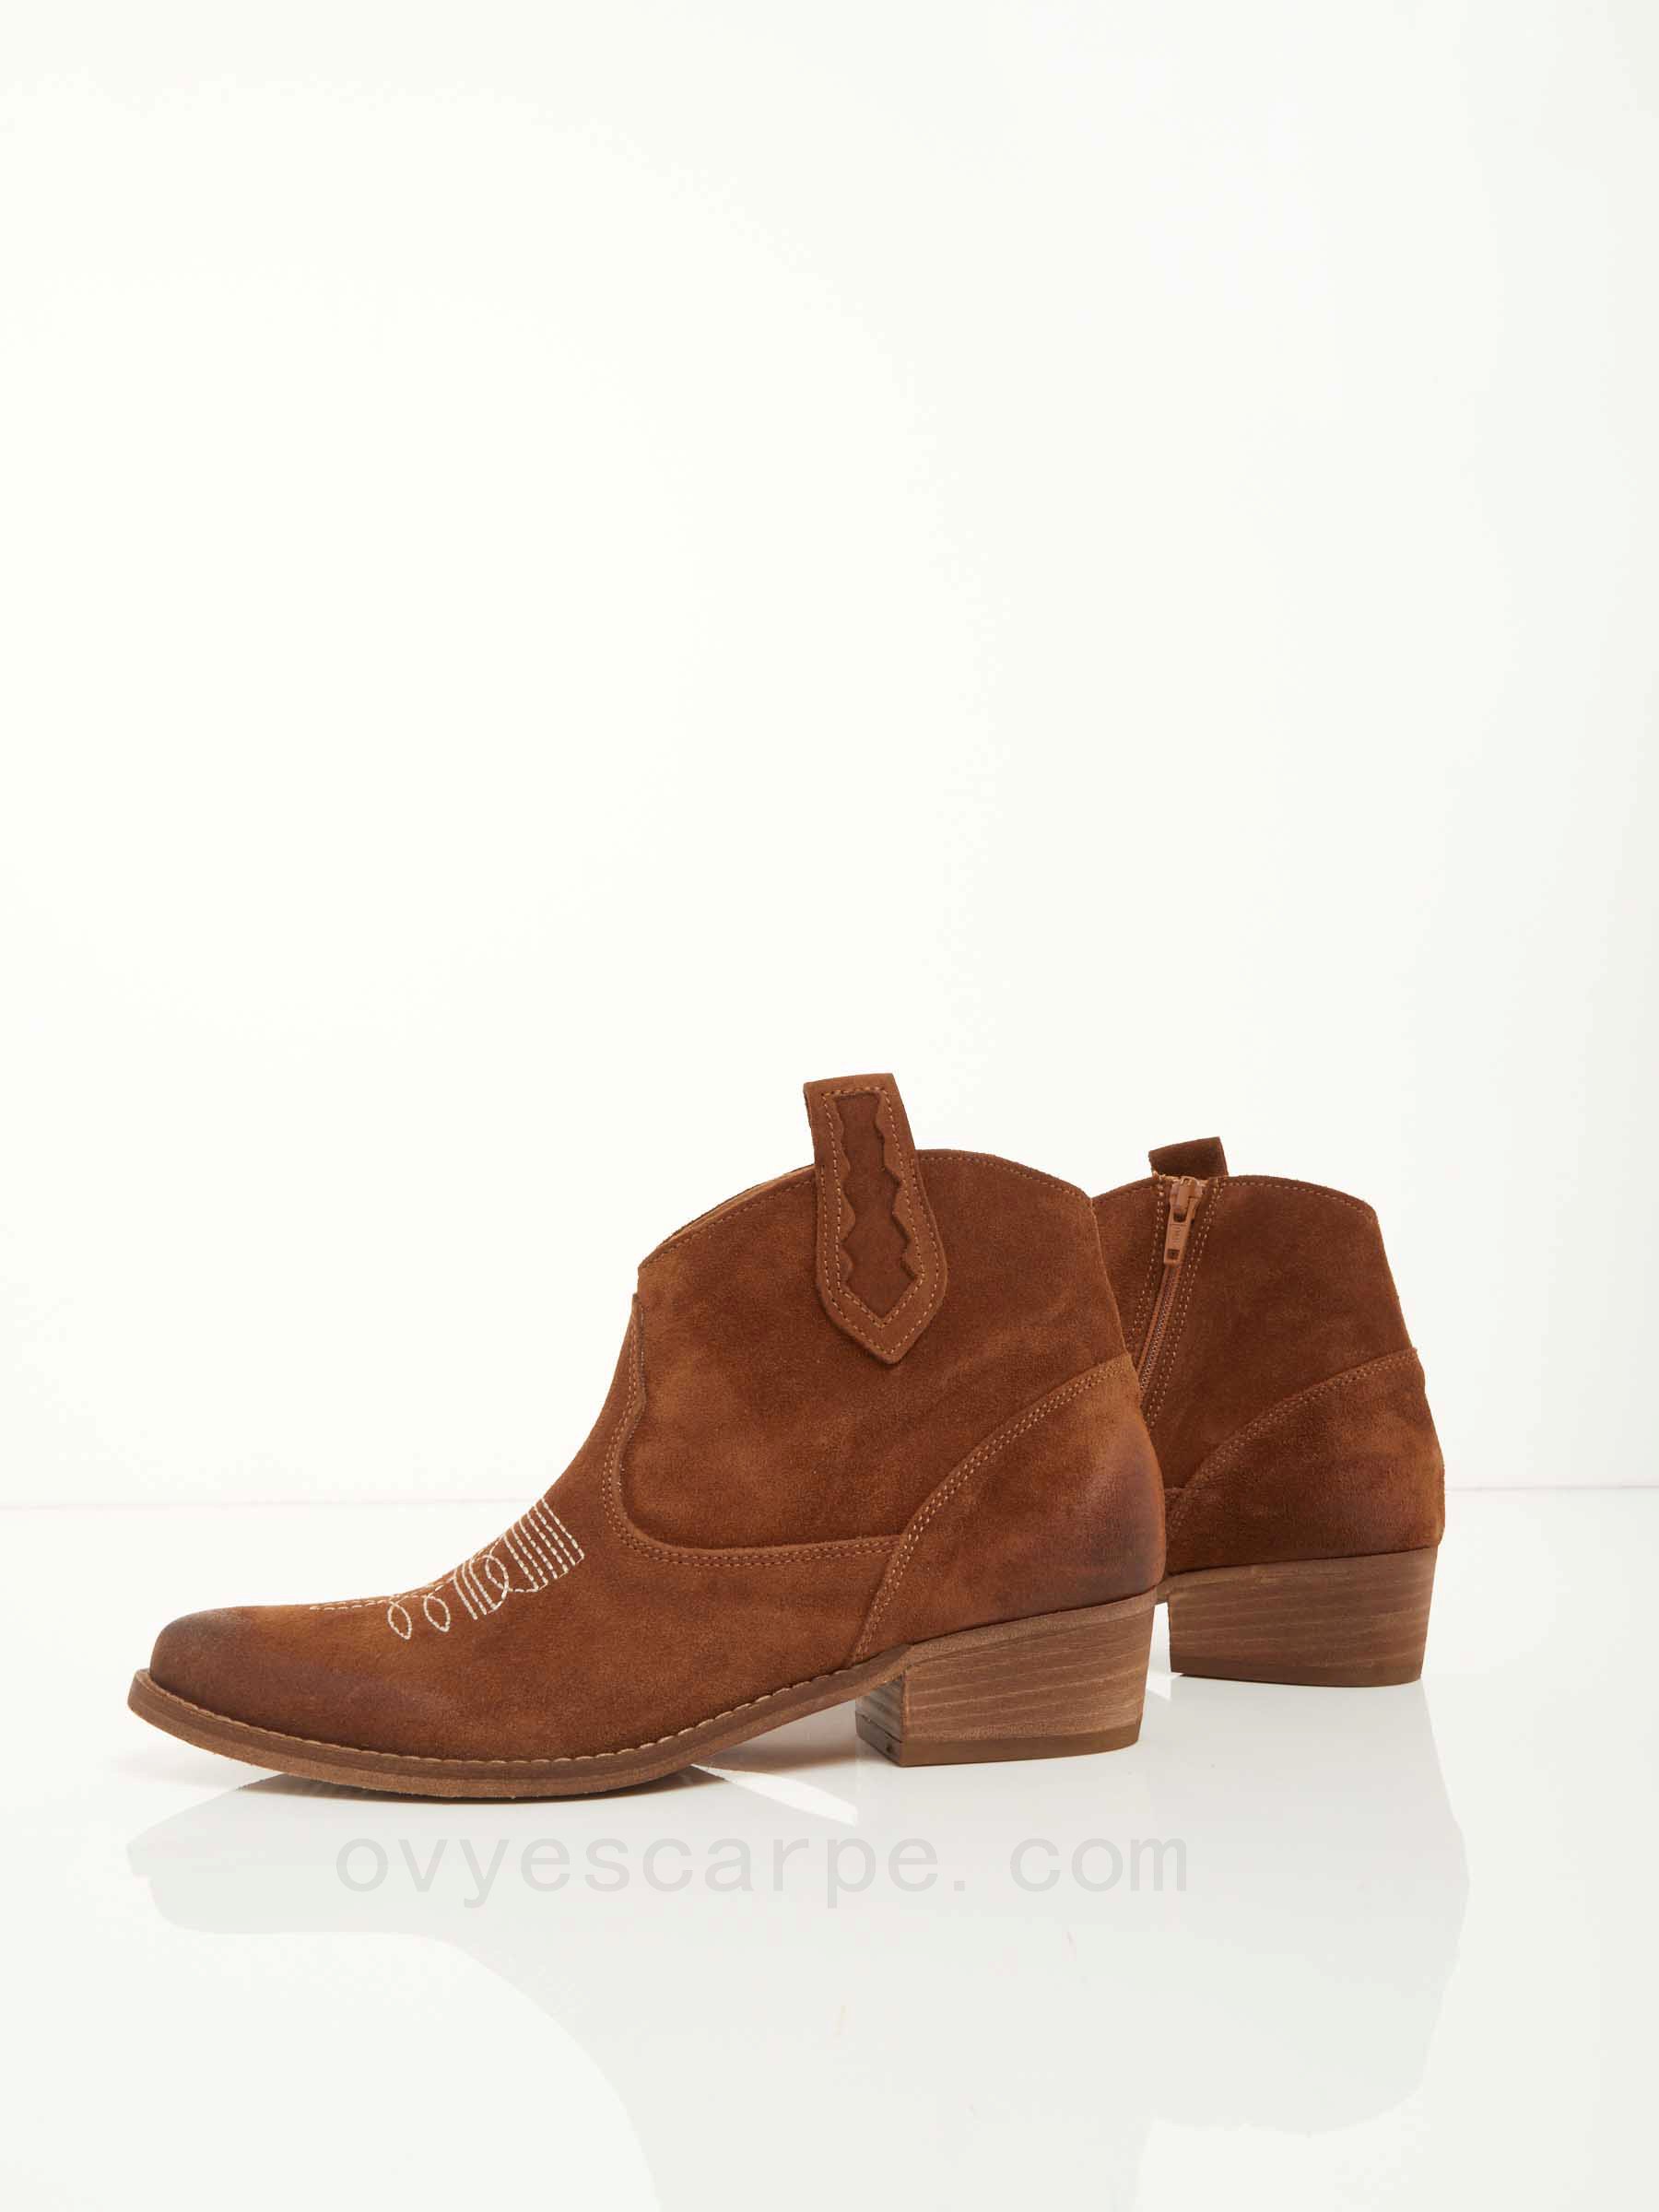 Suede Cowboy Ankle Boots F08161027-0524 Sconti